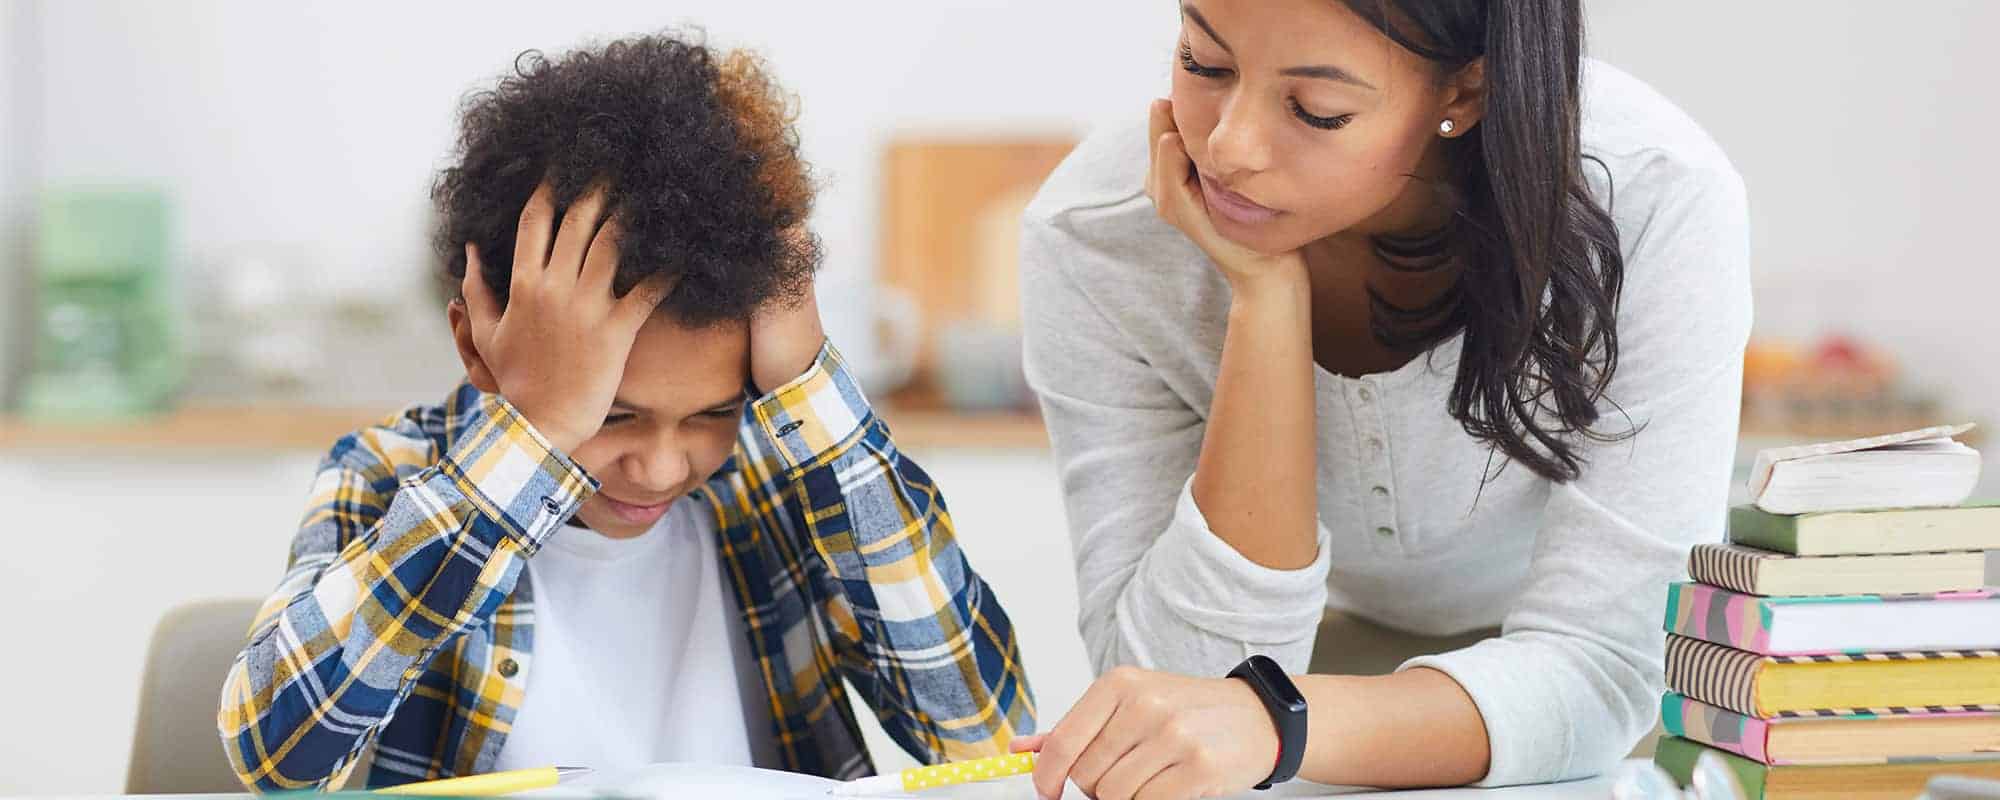 Does My Child Have a Learning Disorder?